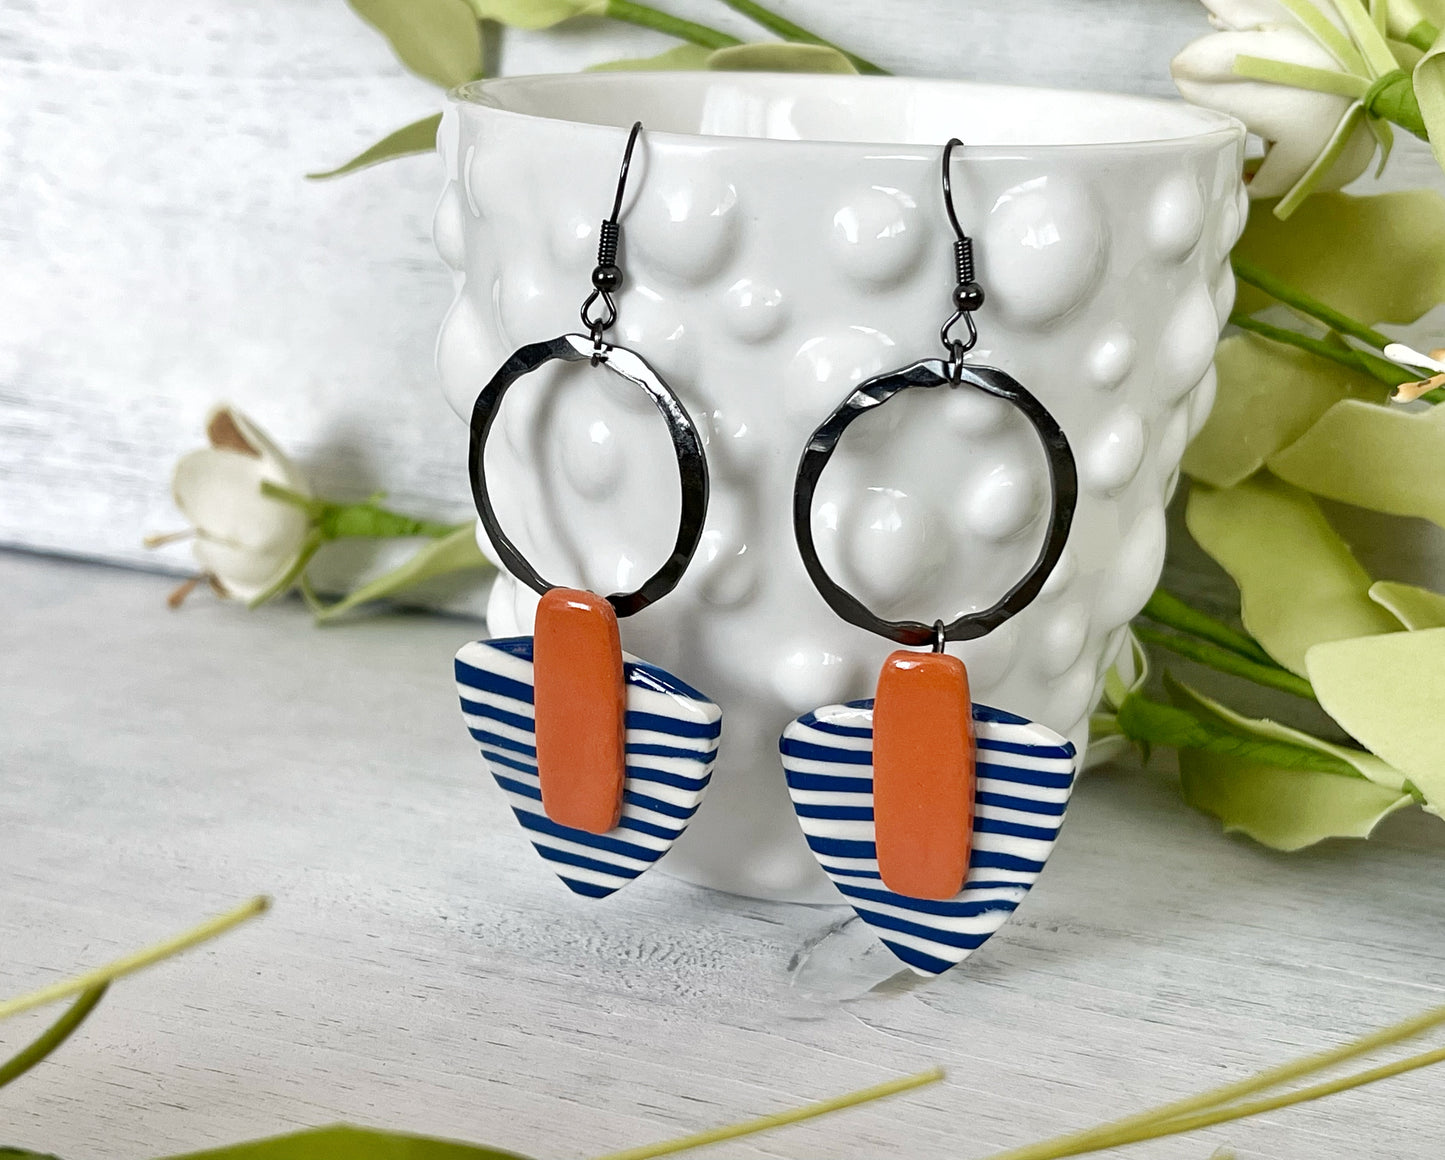 Blue and Orange Triangle Earrings with Black Hardware - Unique